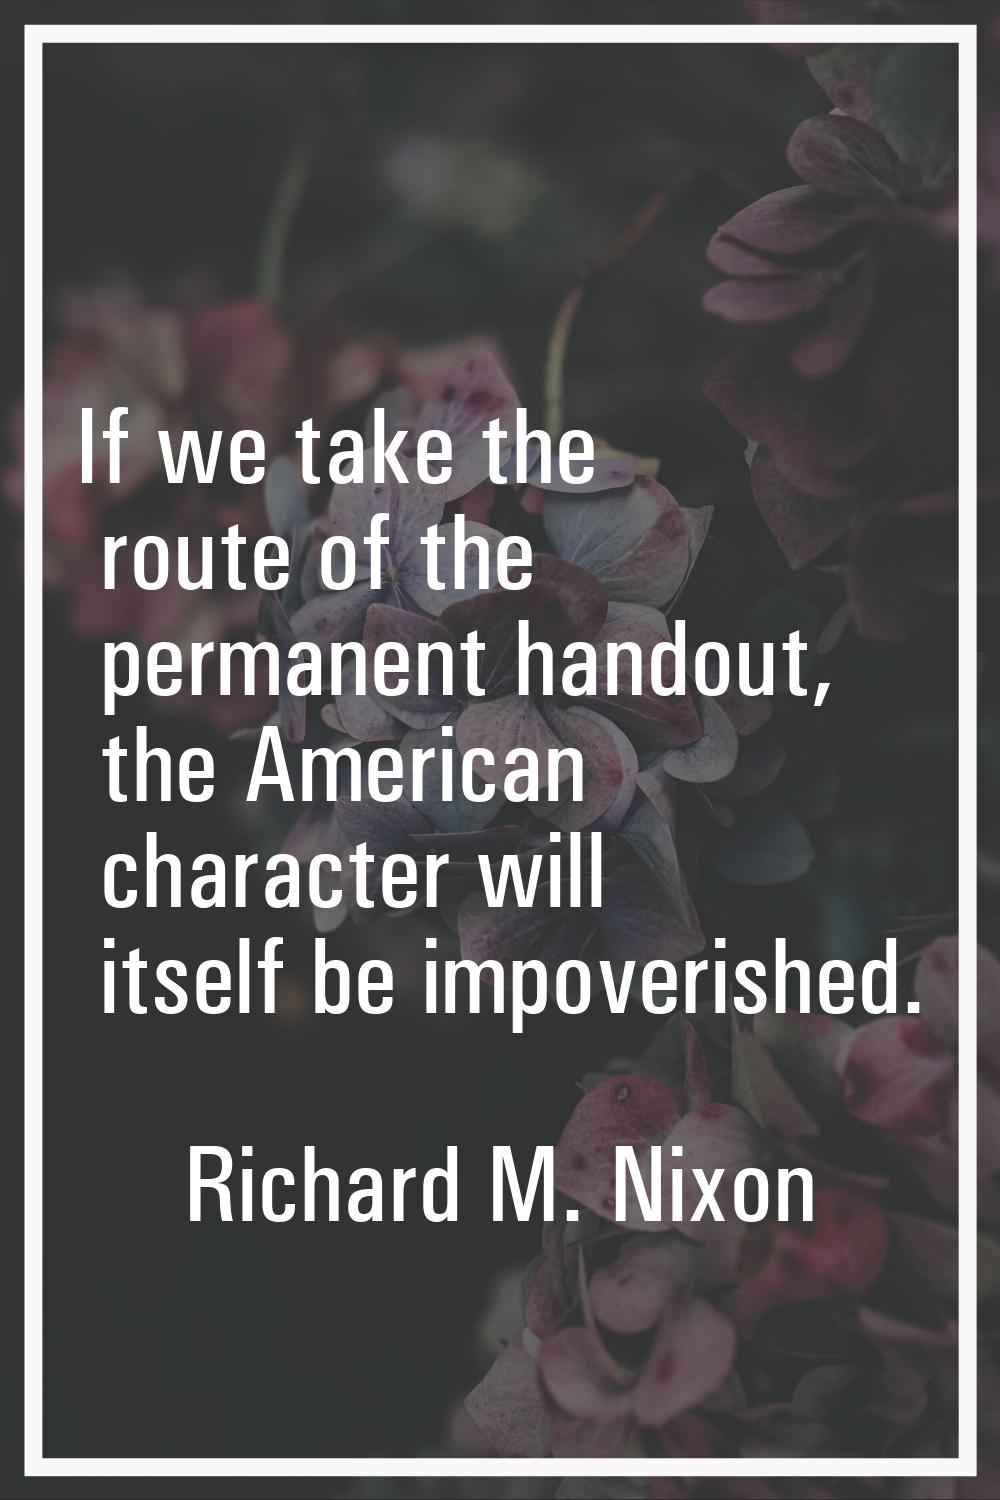 If we take the route of the permanent handout, the American character will itself be impoverished.